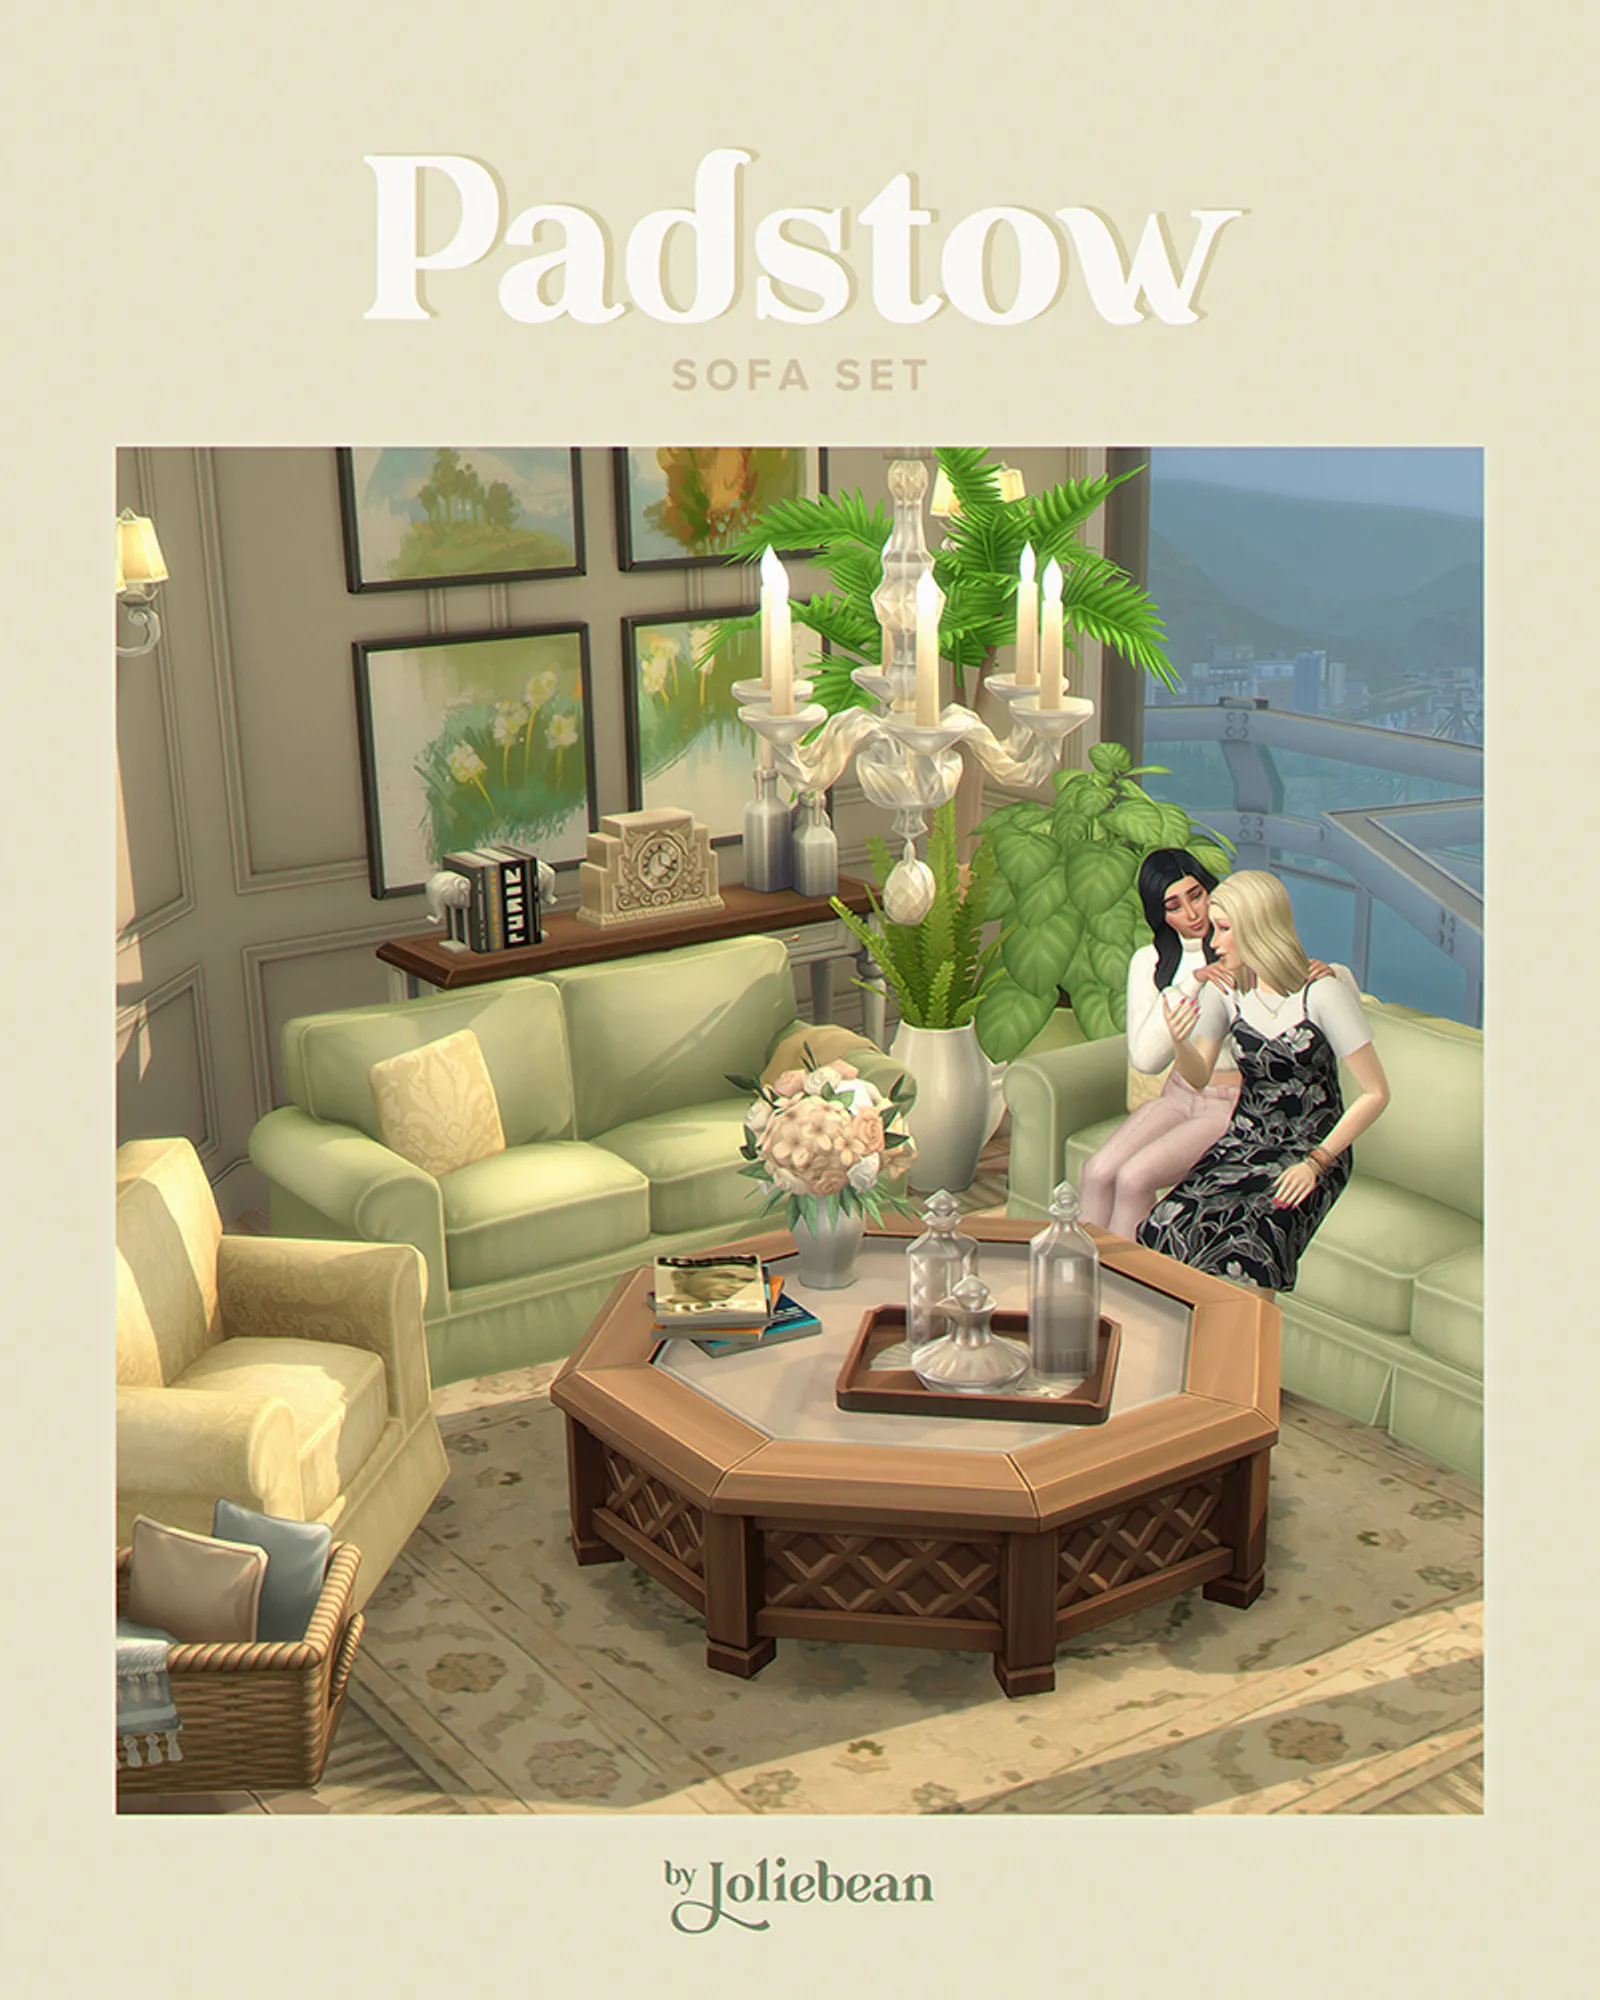 Padstow Sofa Set by Joliebean